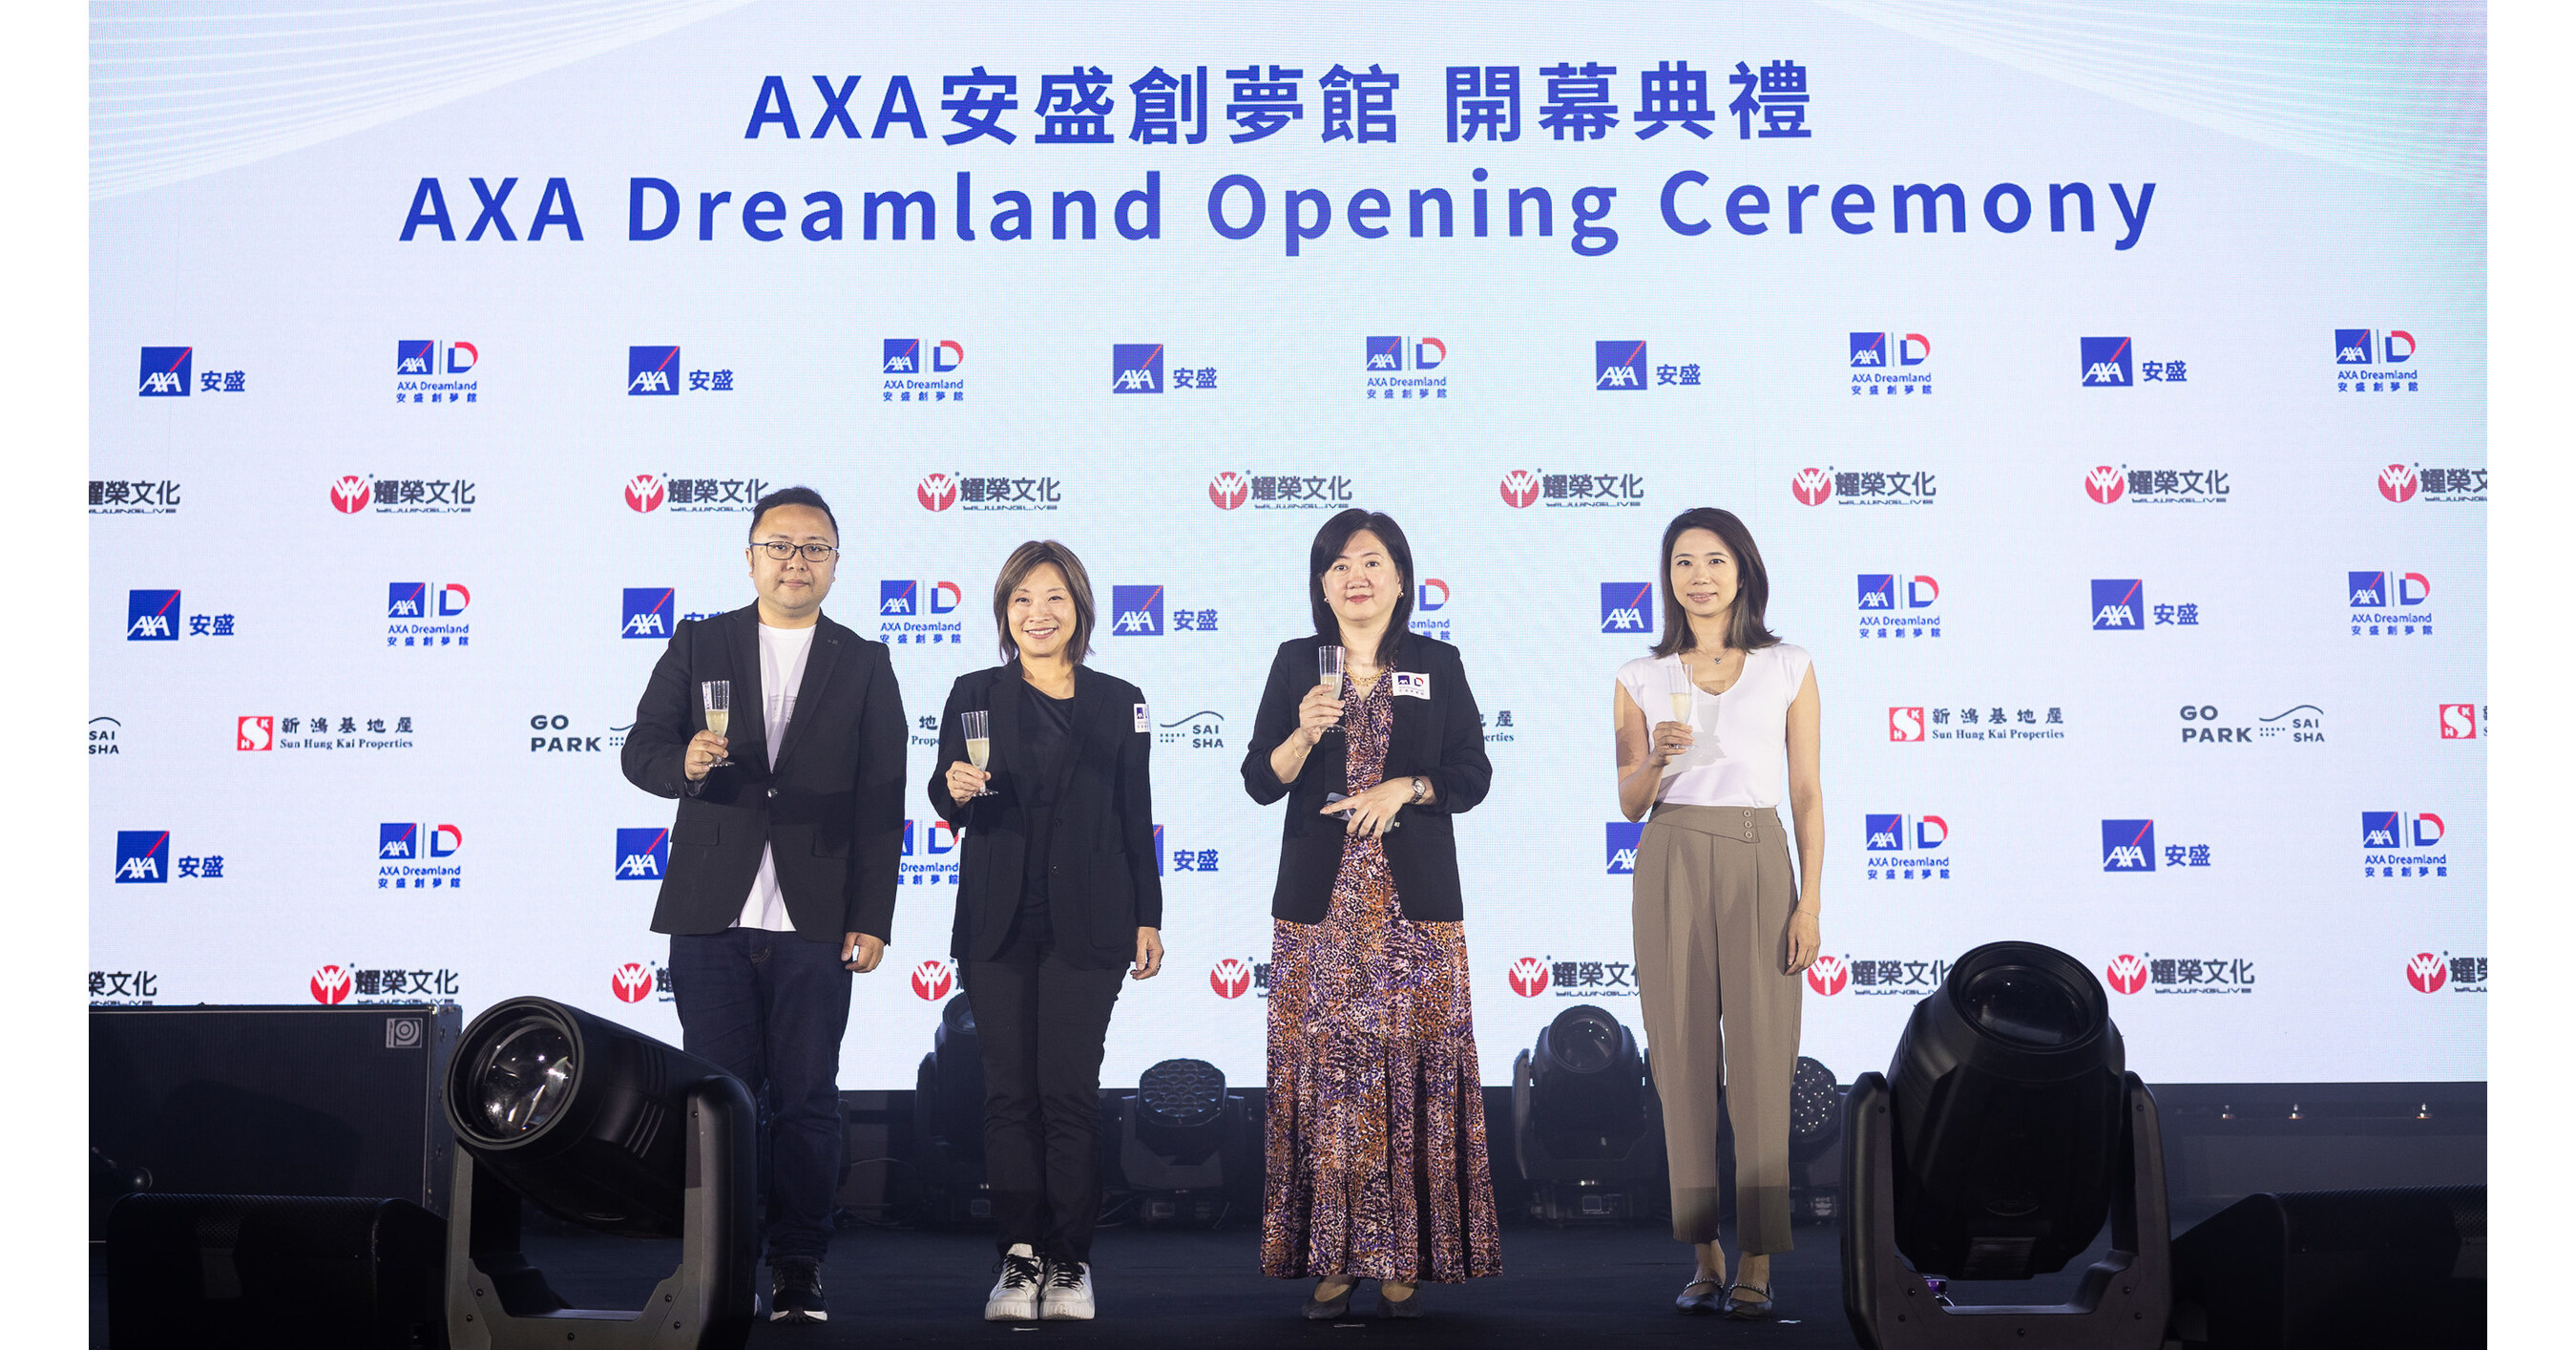 AXA Dreamland, new entertainment and sports landmark title sponsored by AXA, opens today